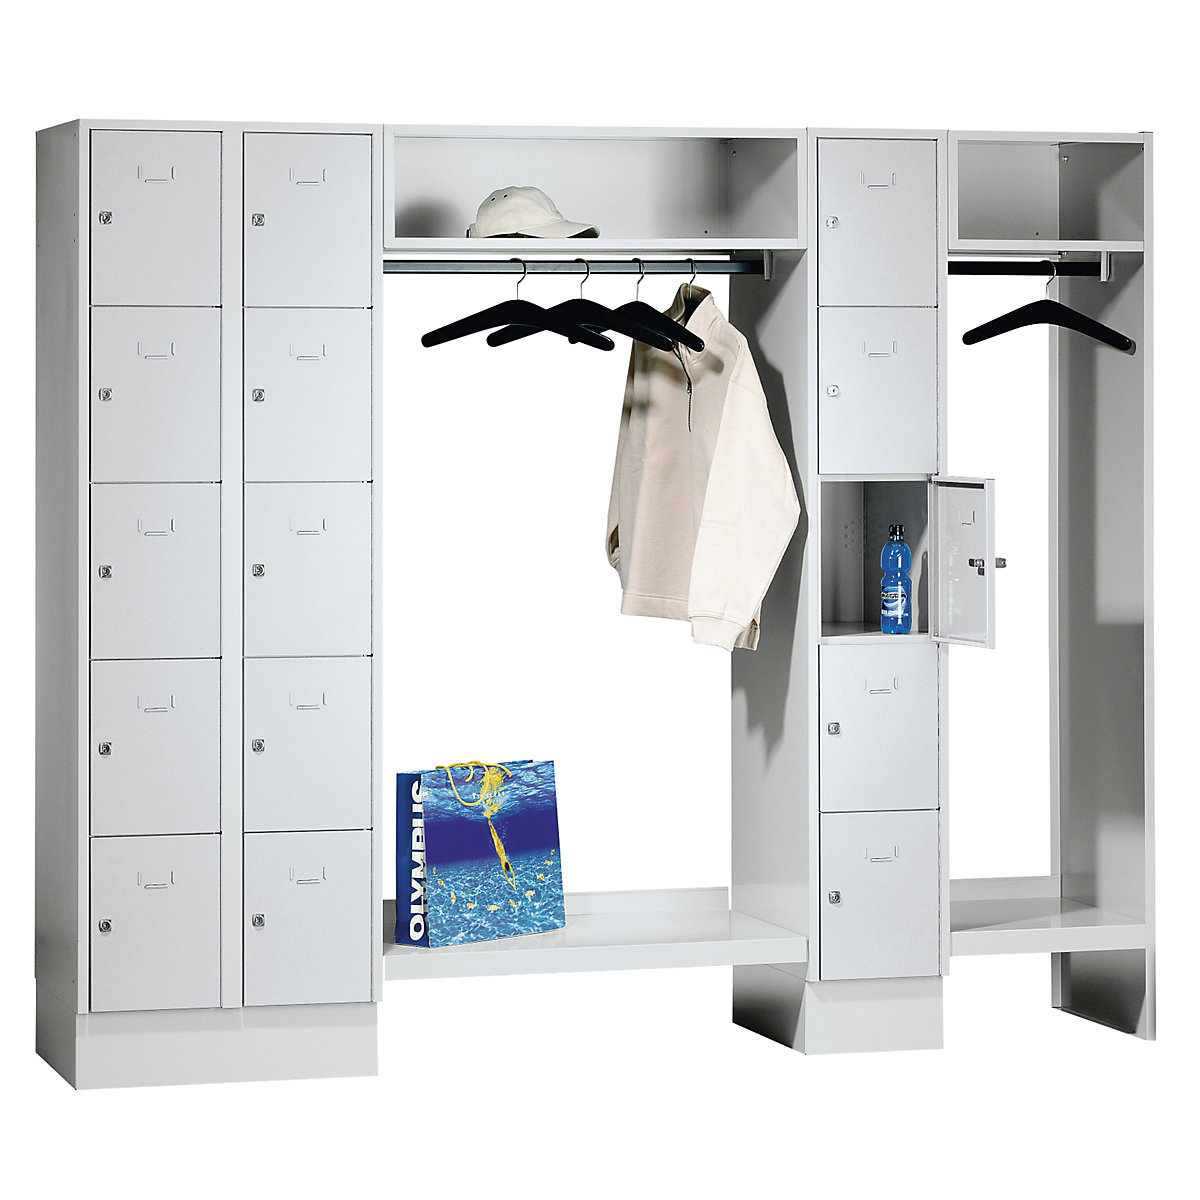 Cloakroom locker system – Wolf, 15 compartments left / centre, 15 coat hangers, overall width 2220 mm, compartment width 298 mm, light grey-8